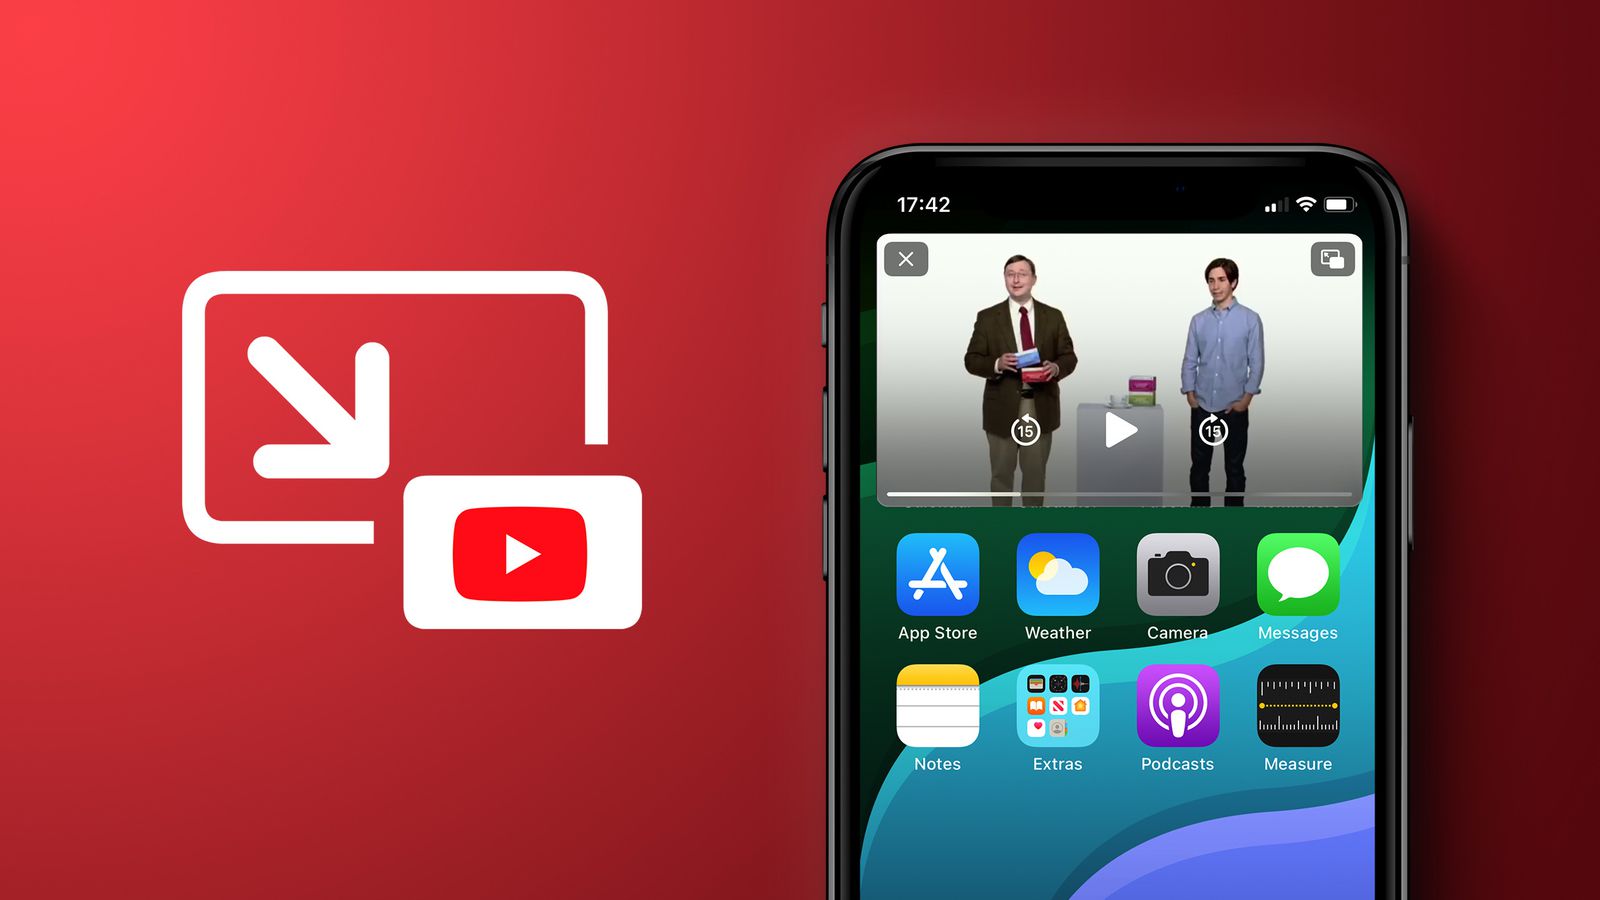 YouTube Rolling Out Picture-in-Picture Support on iOS for All U.S. Users, Premium Users Globally - MacRumors